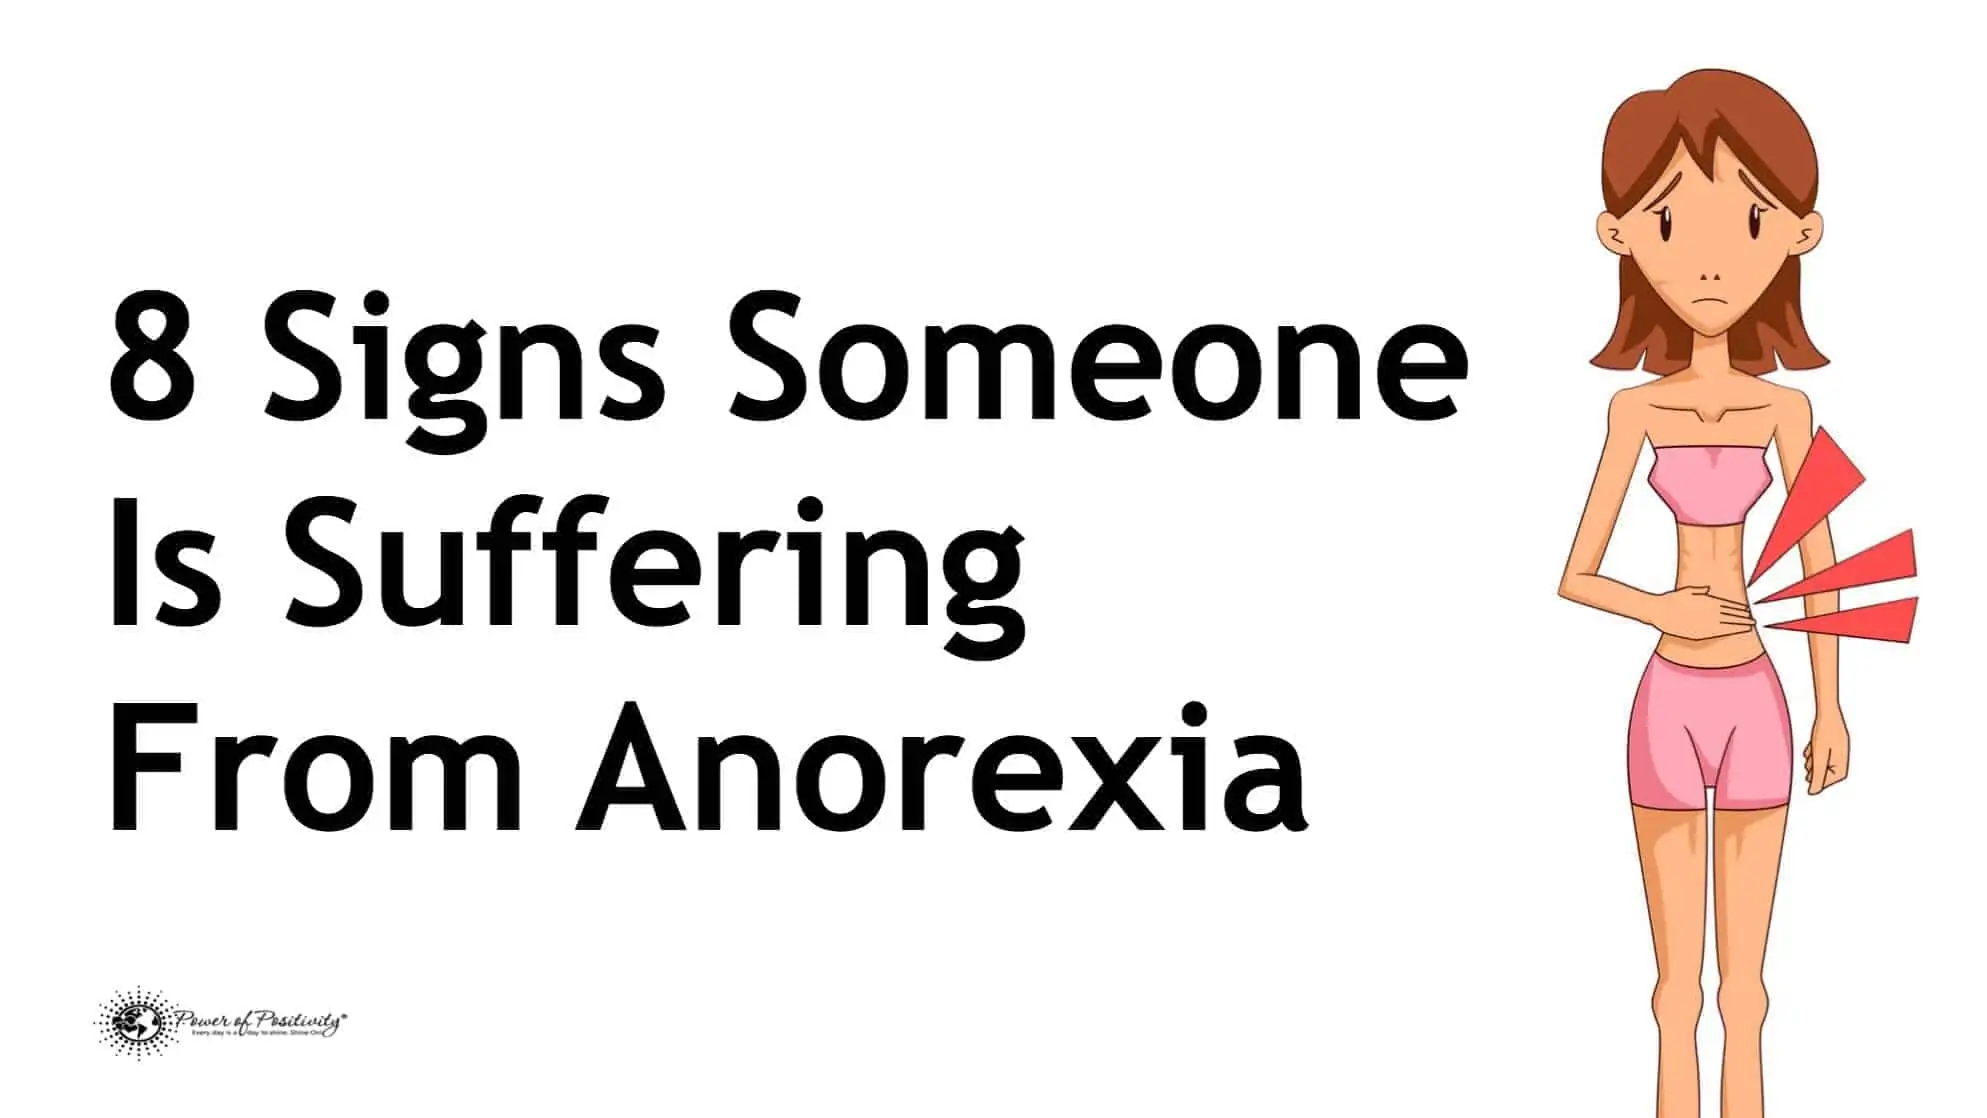 Signs Someone Is Suffering From Anorexia